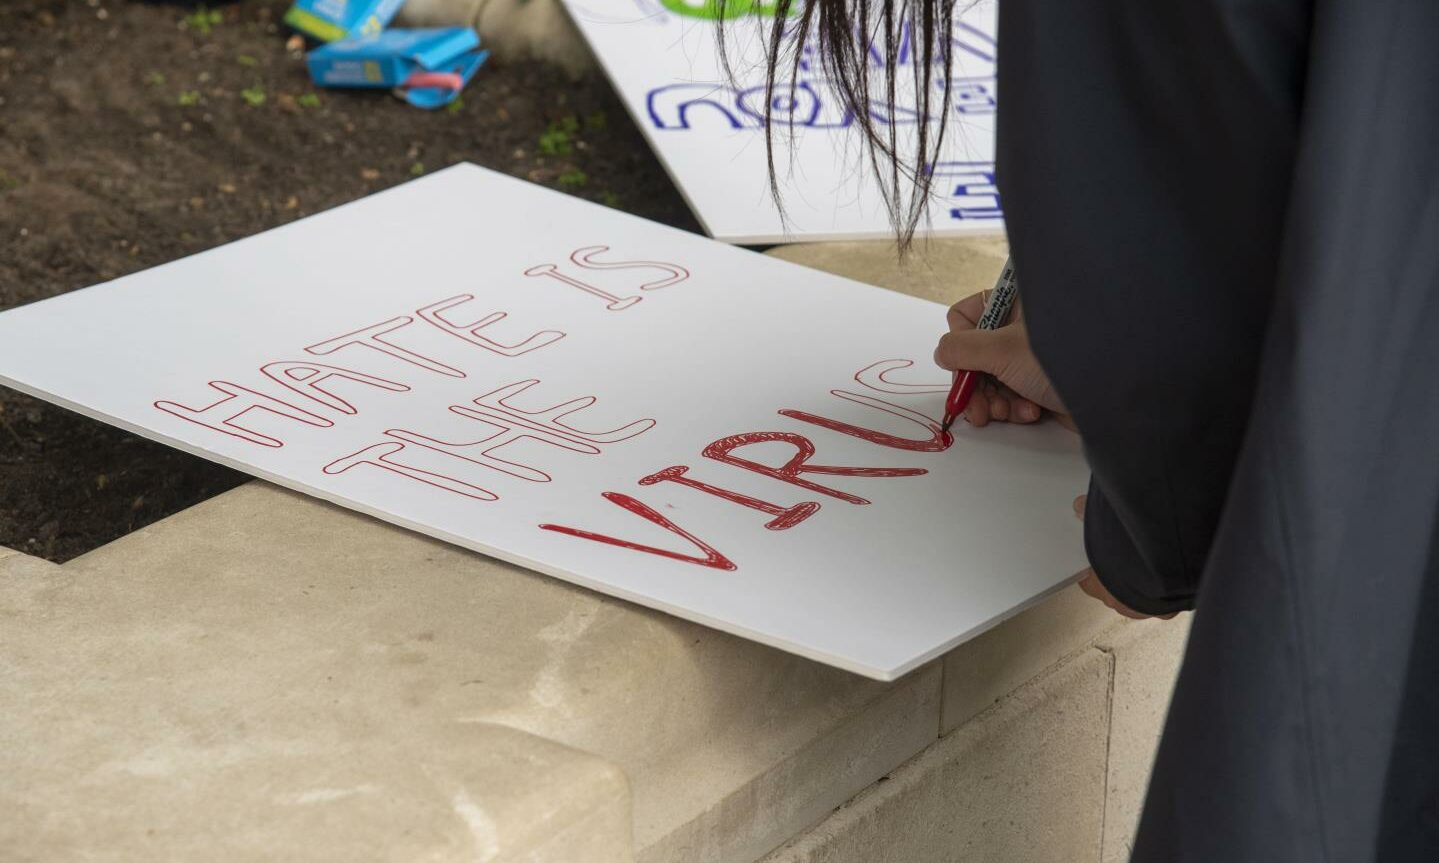 A demonstrator drawing a placard for a 'stop Asian hate' protest earlier this year (Photo: Dave Rushen/SOPA Images/Shutterstock)